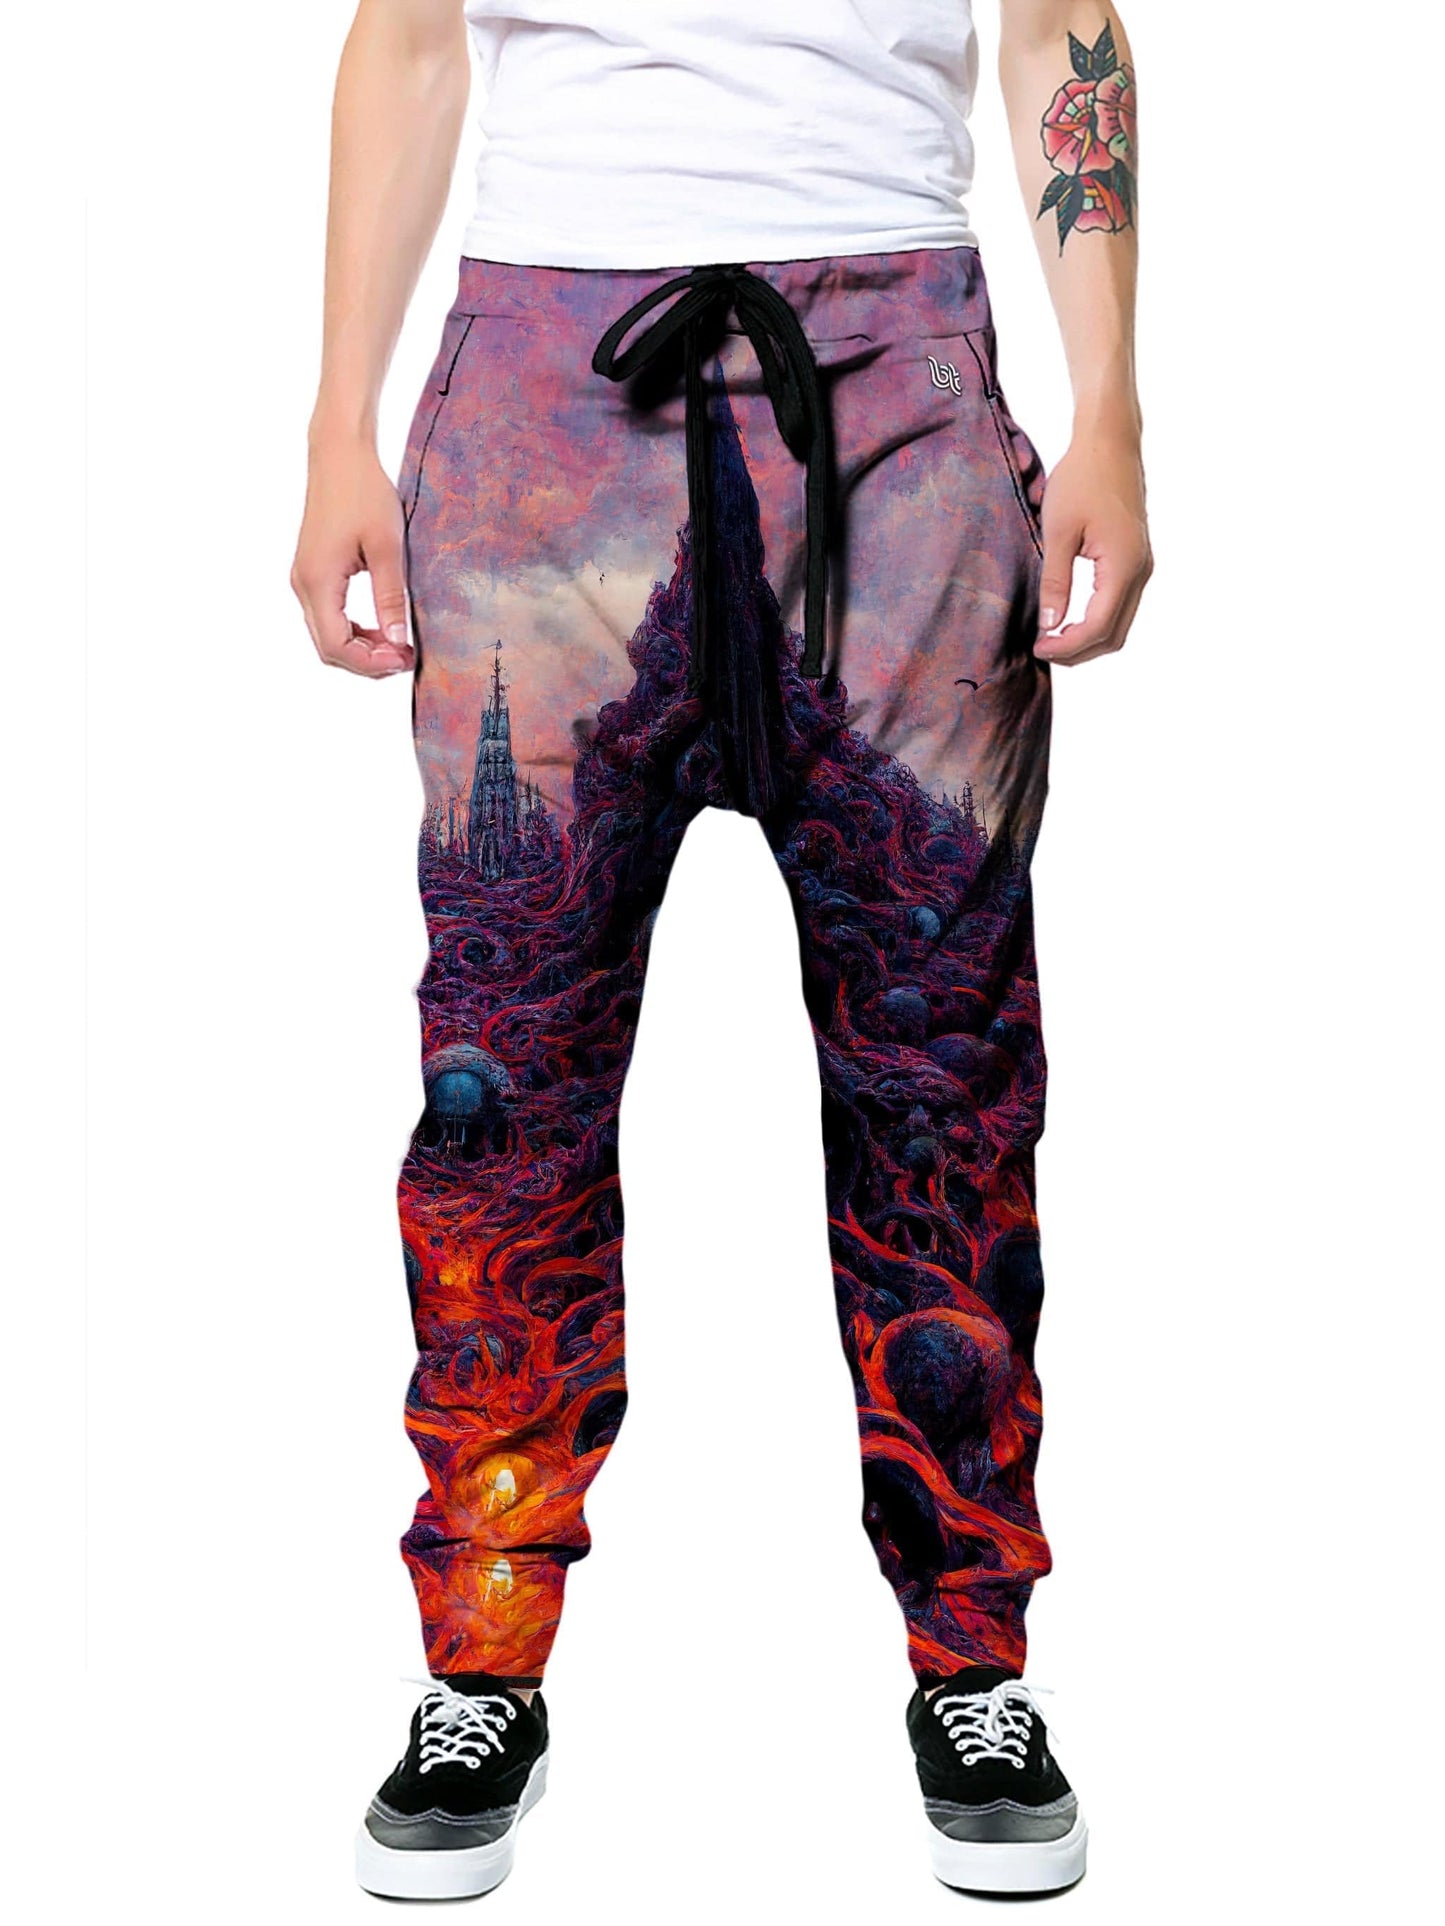 Scandalous Love Joggers, Gratefully Dyed, | iEDM